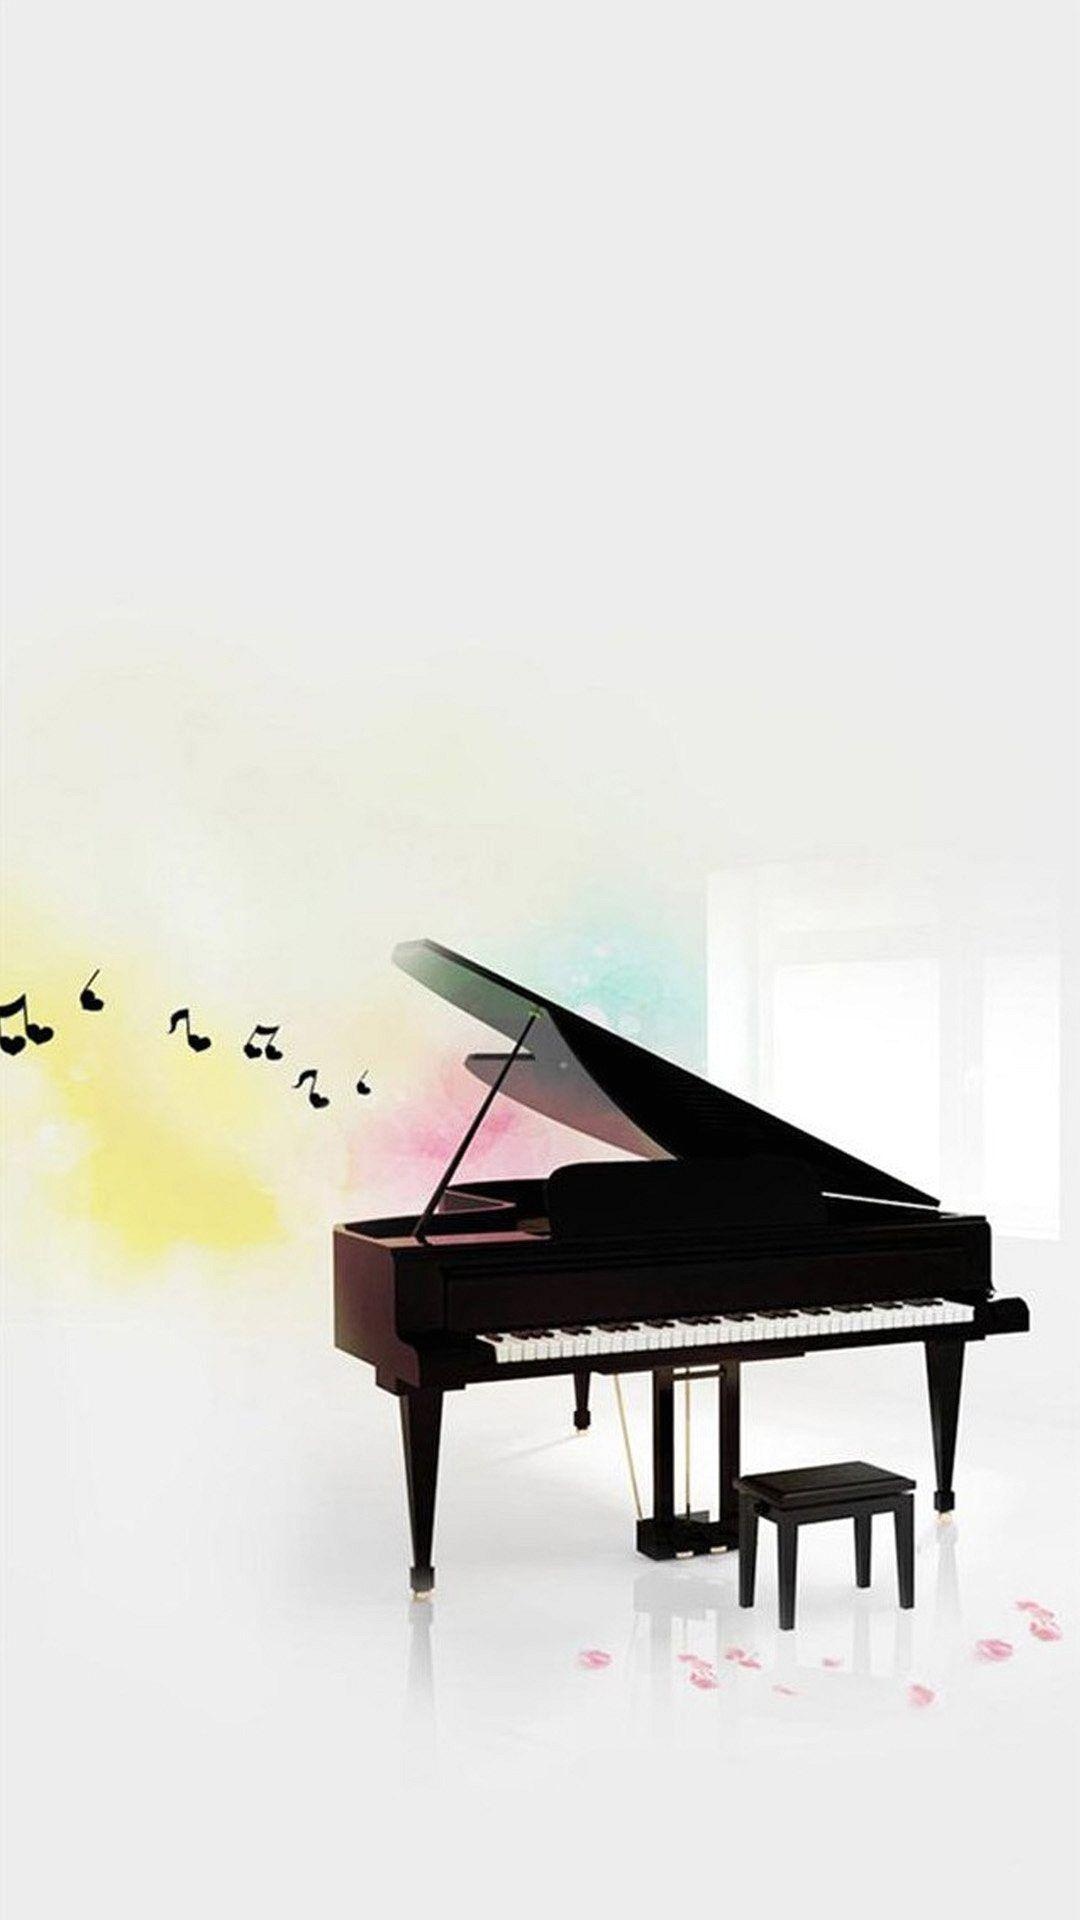 Fortepiano: Grand Piano, Keyboard And A Pedal Clavier, Inspirational Music. 1080x1920 Full HD Background.